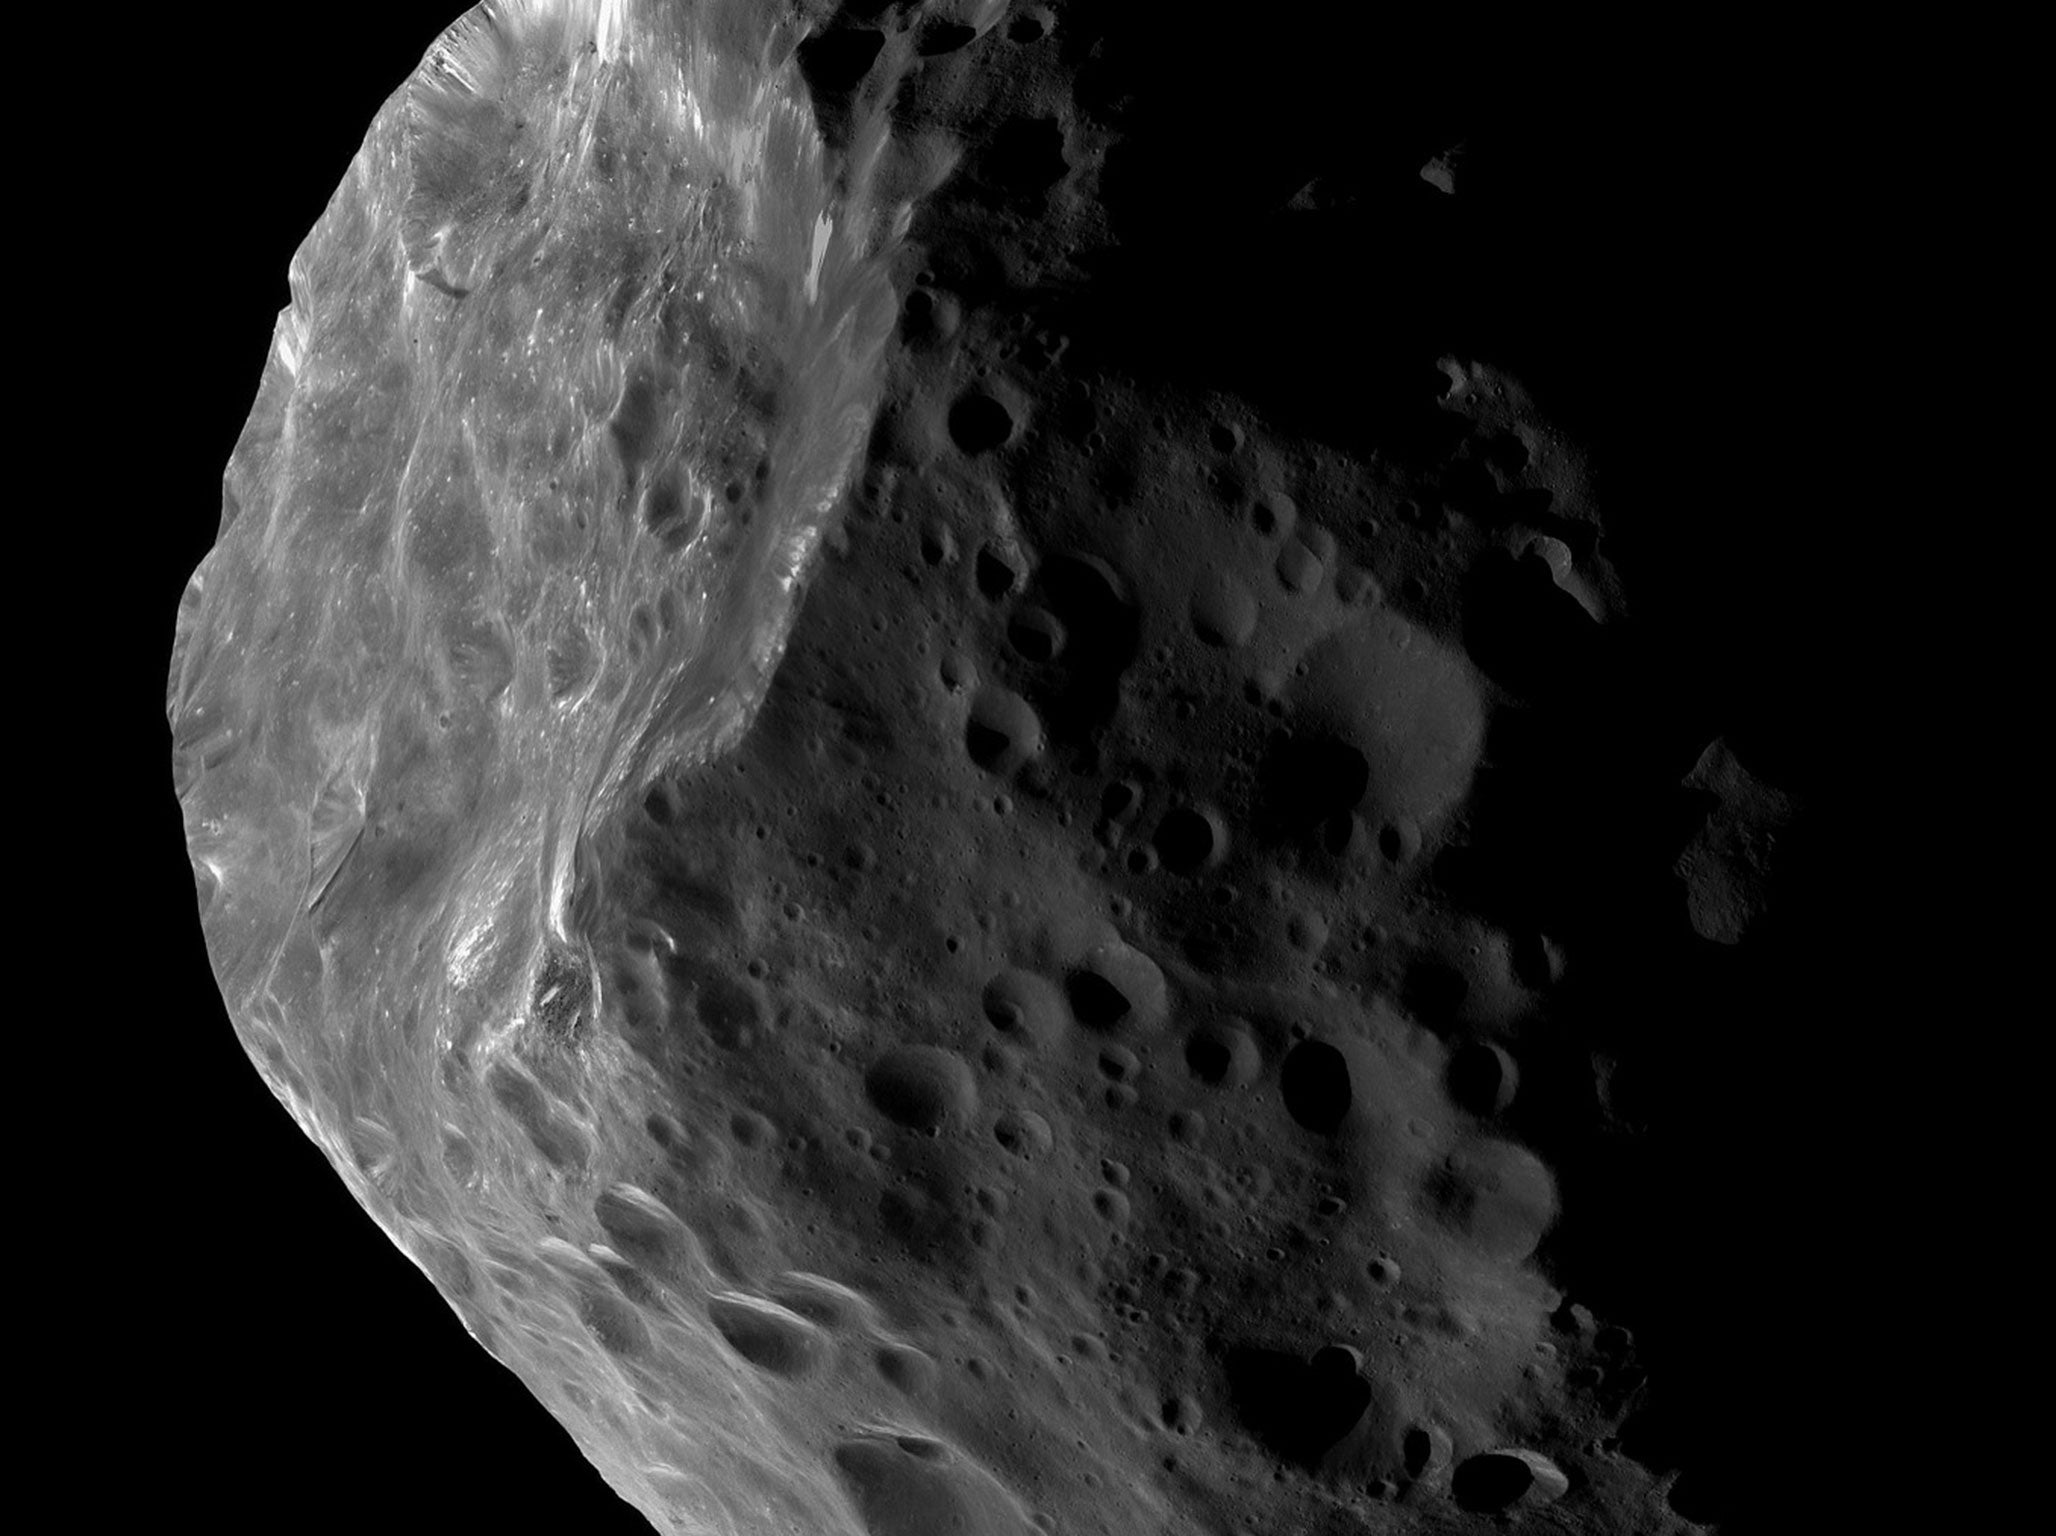 Because they are so distant from the Earth, Centaurs appear as pinpricks of light in even the largest telescopes. Saturn's 200-km moon Phoebe, depicted in this image, seems likely to be a Centaur that was captured by that planet's gravity at some time in the past. Until spacecraft are sent to visit other Centaurs, our best idea of what they look like comes from images like this one, obtained by the Cassini space probe orbiting Saturn